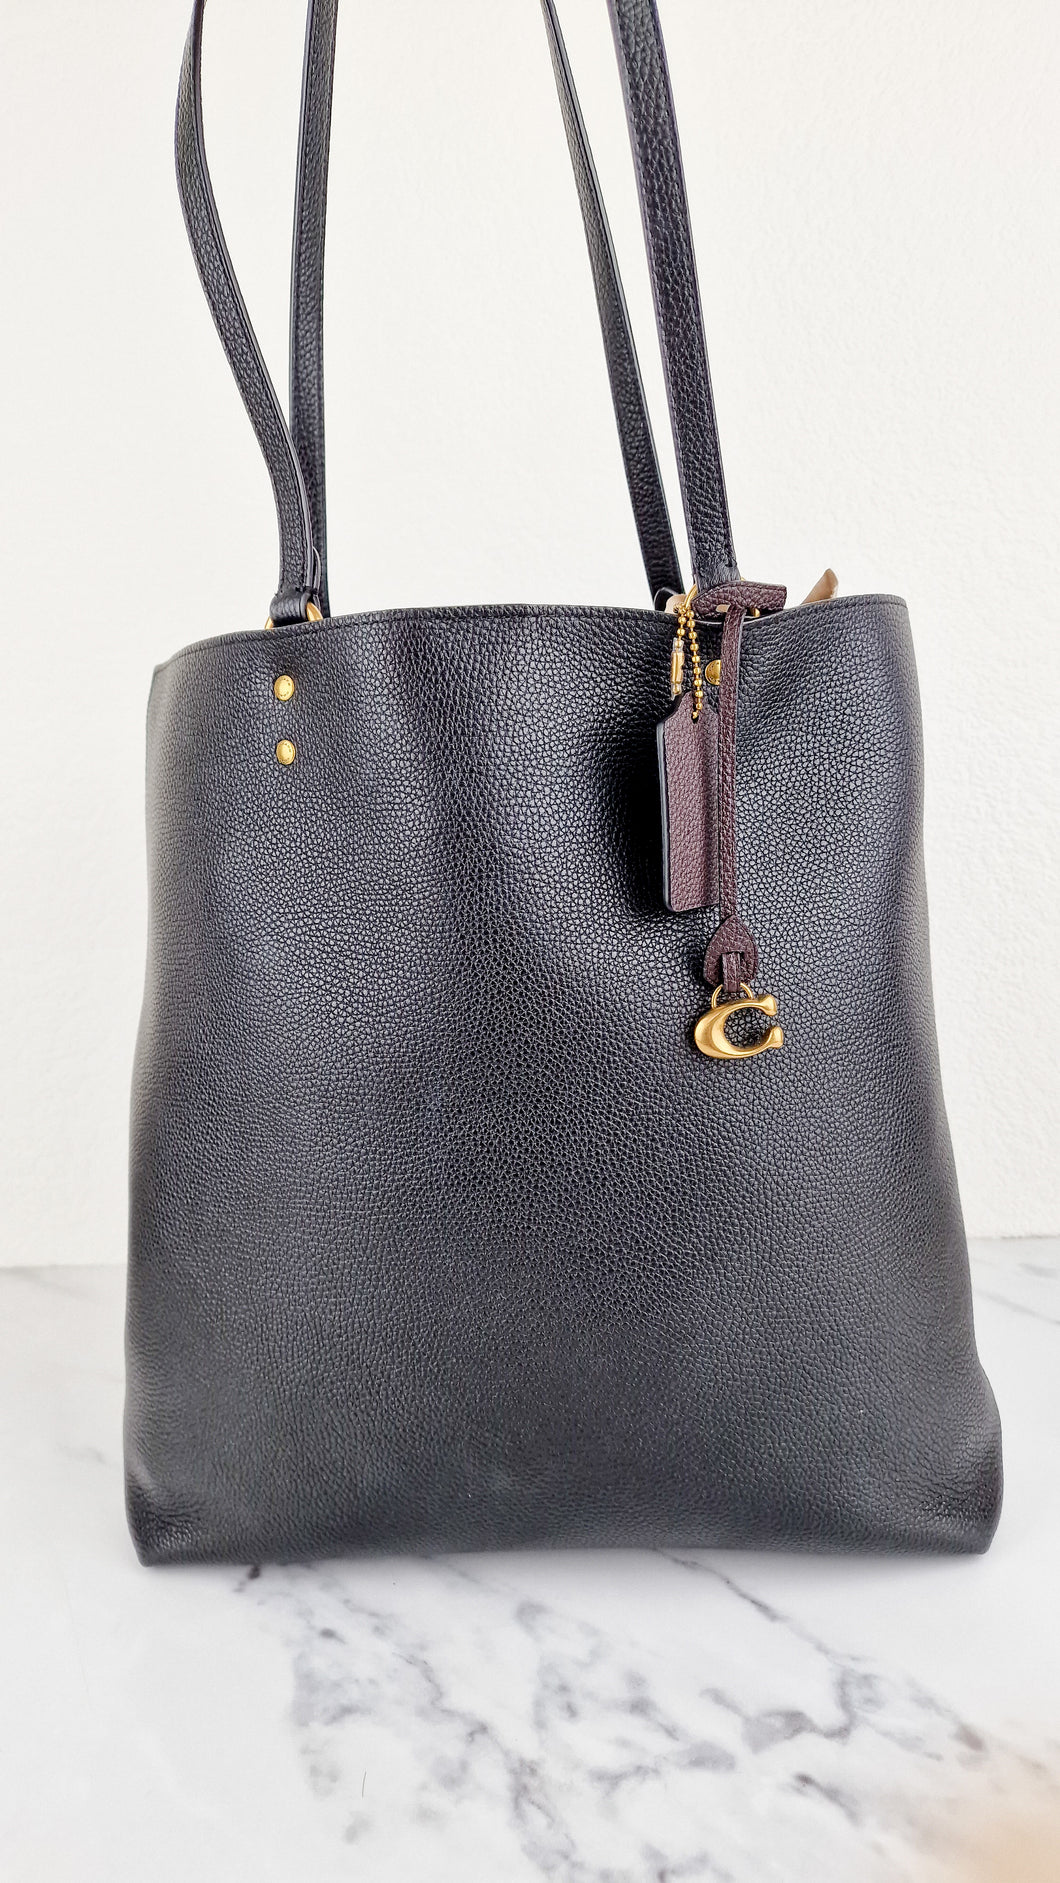 Coach Plaza Tote Bag in Black Pebble Leather with Brass Hardware & Coach C Charm - Coach 88341 